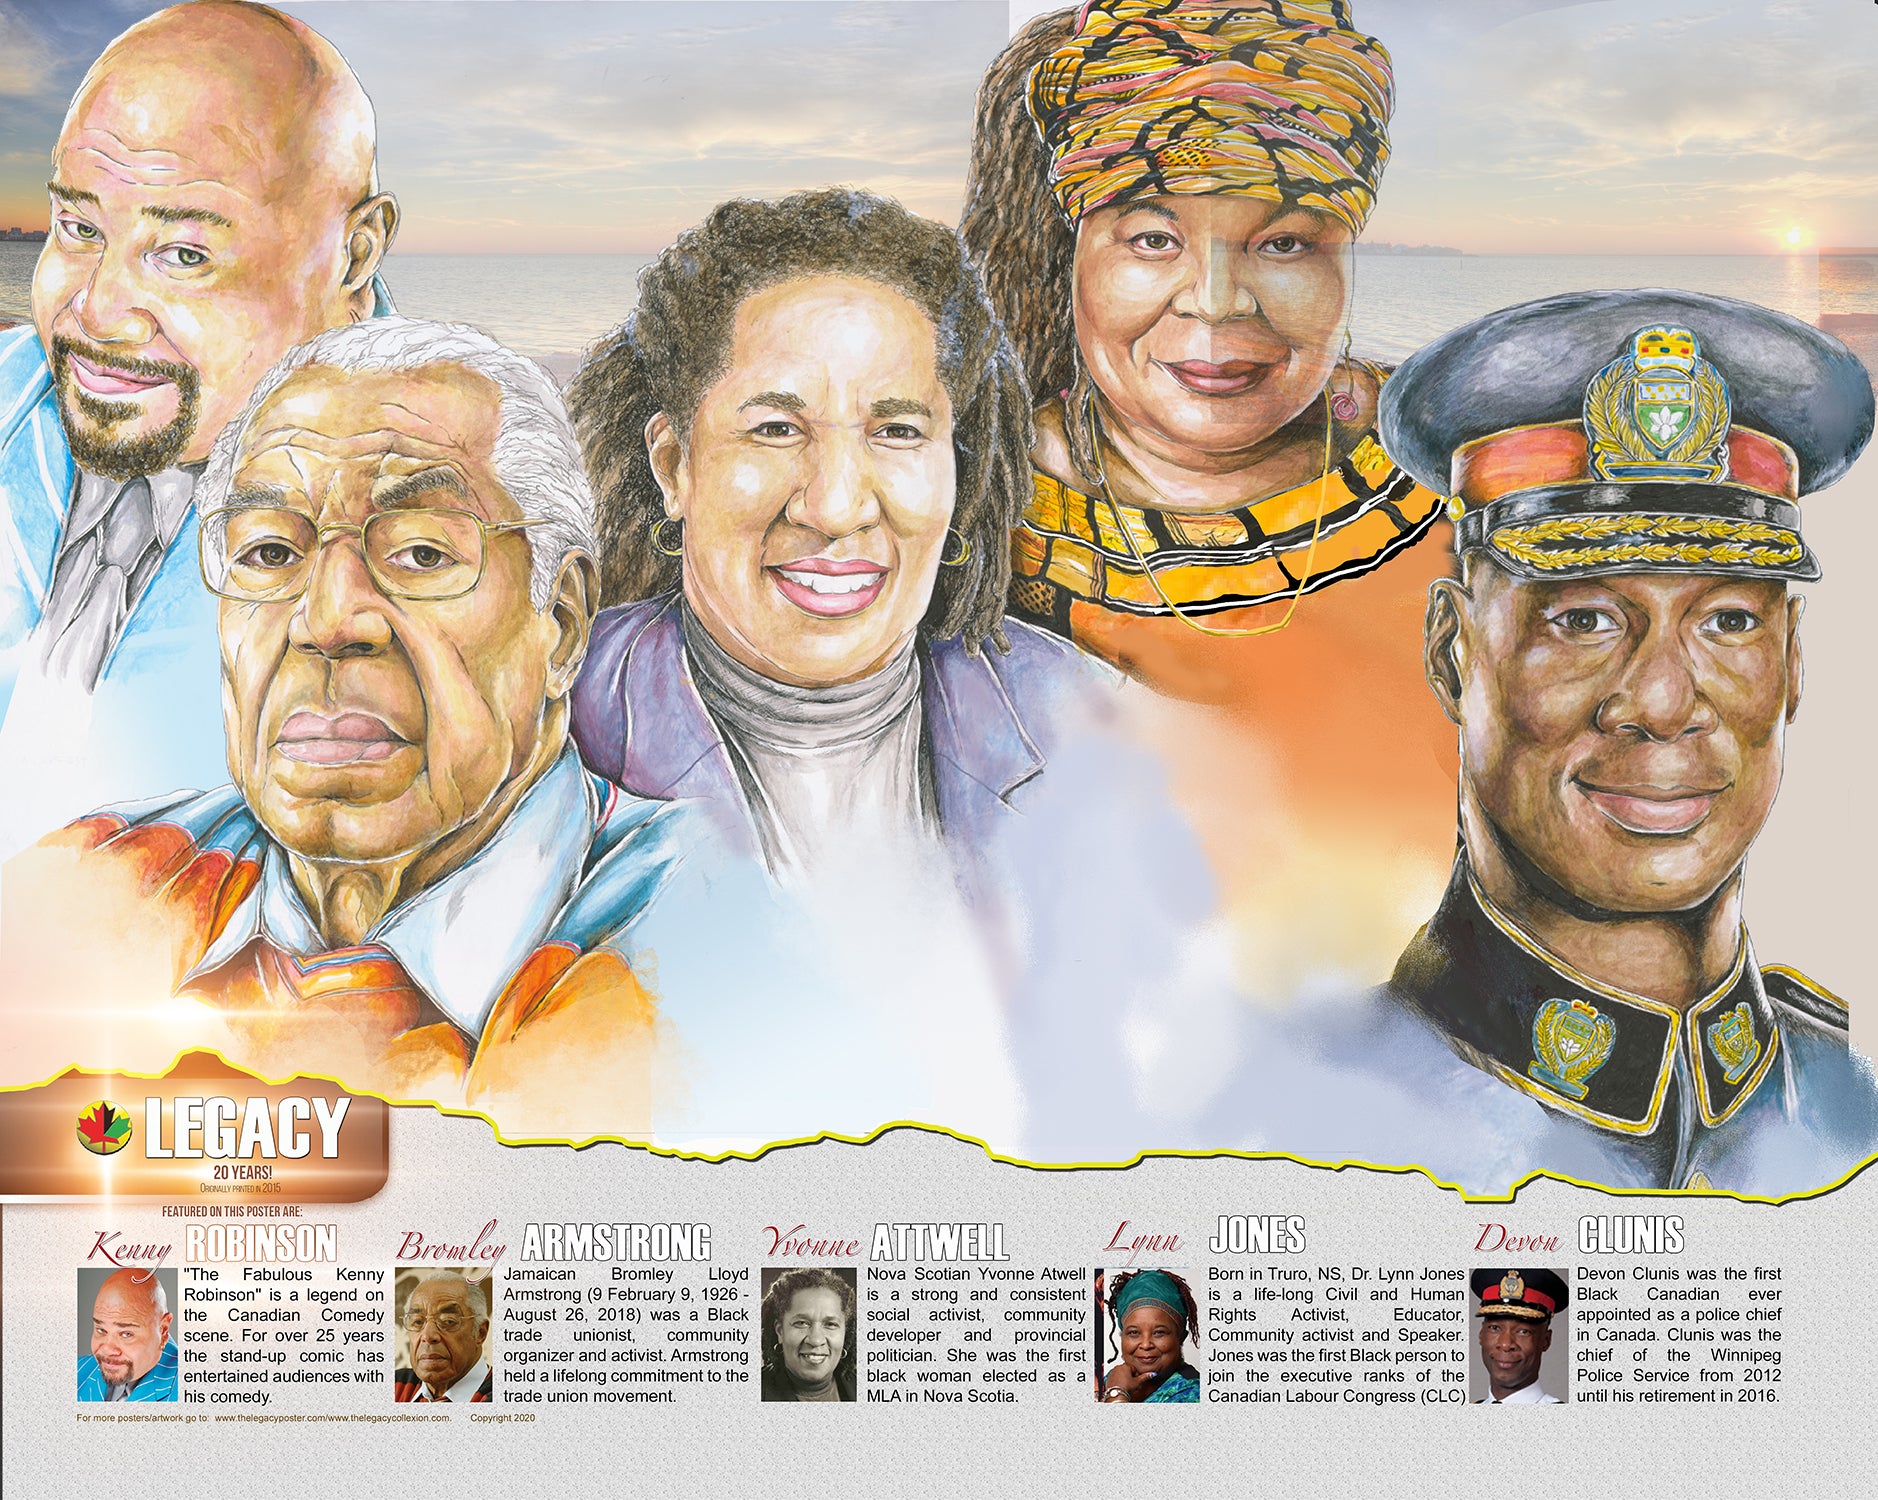 “An educational poster, ideal for Black History Month featuring actor/comedian Kenny Robinson, labour activist Bromley Armstrong, community activists Yvonne Atwell and Lynn Jones as well as Police Chief Devon Clunis created by African-Canadian artist Robert Small.”